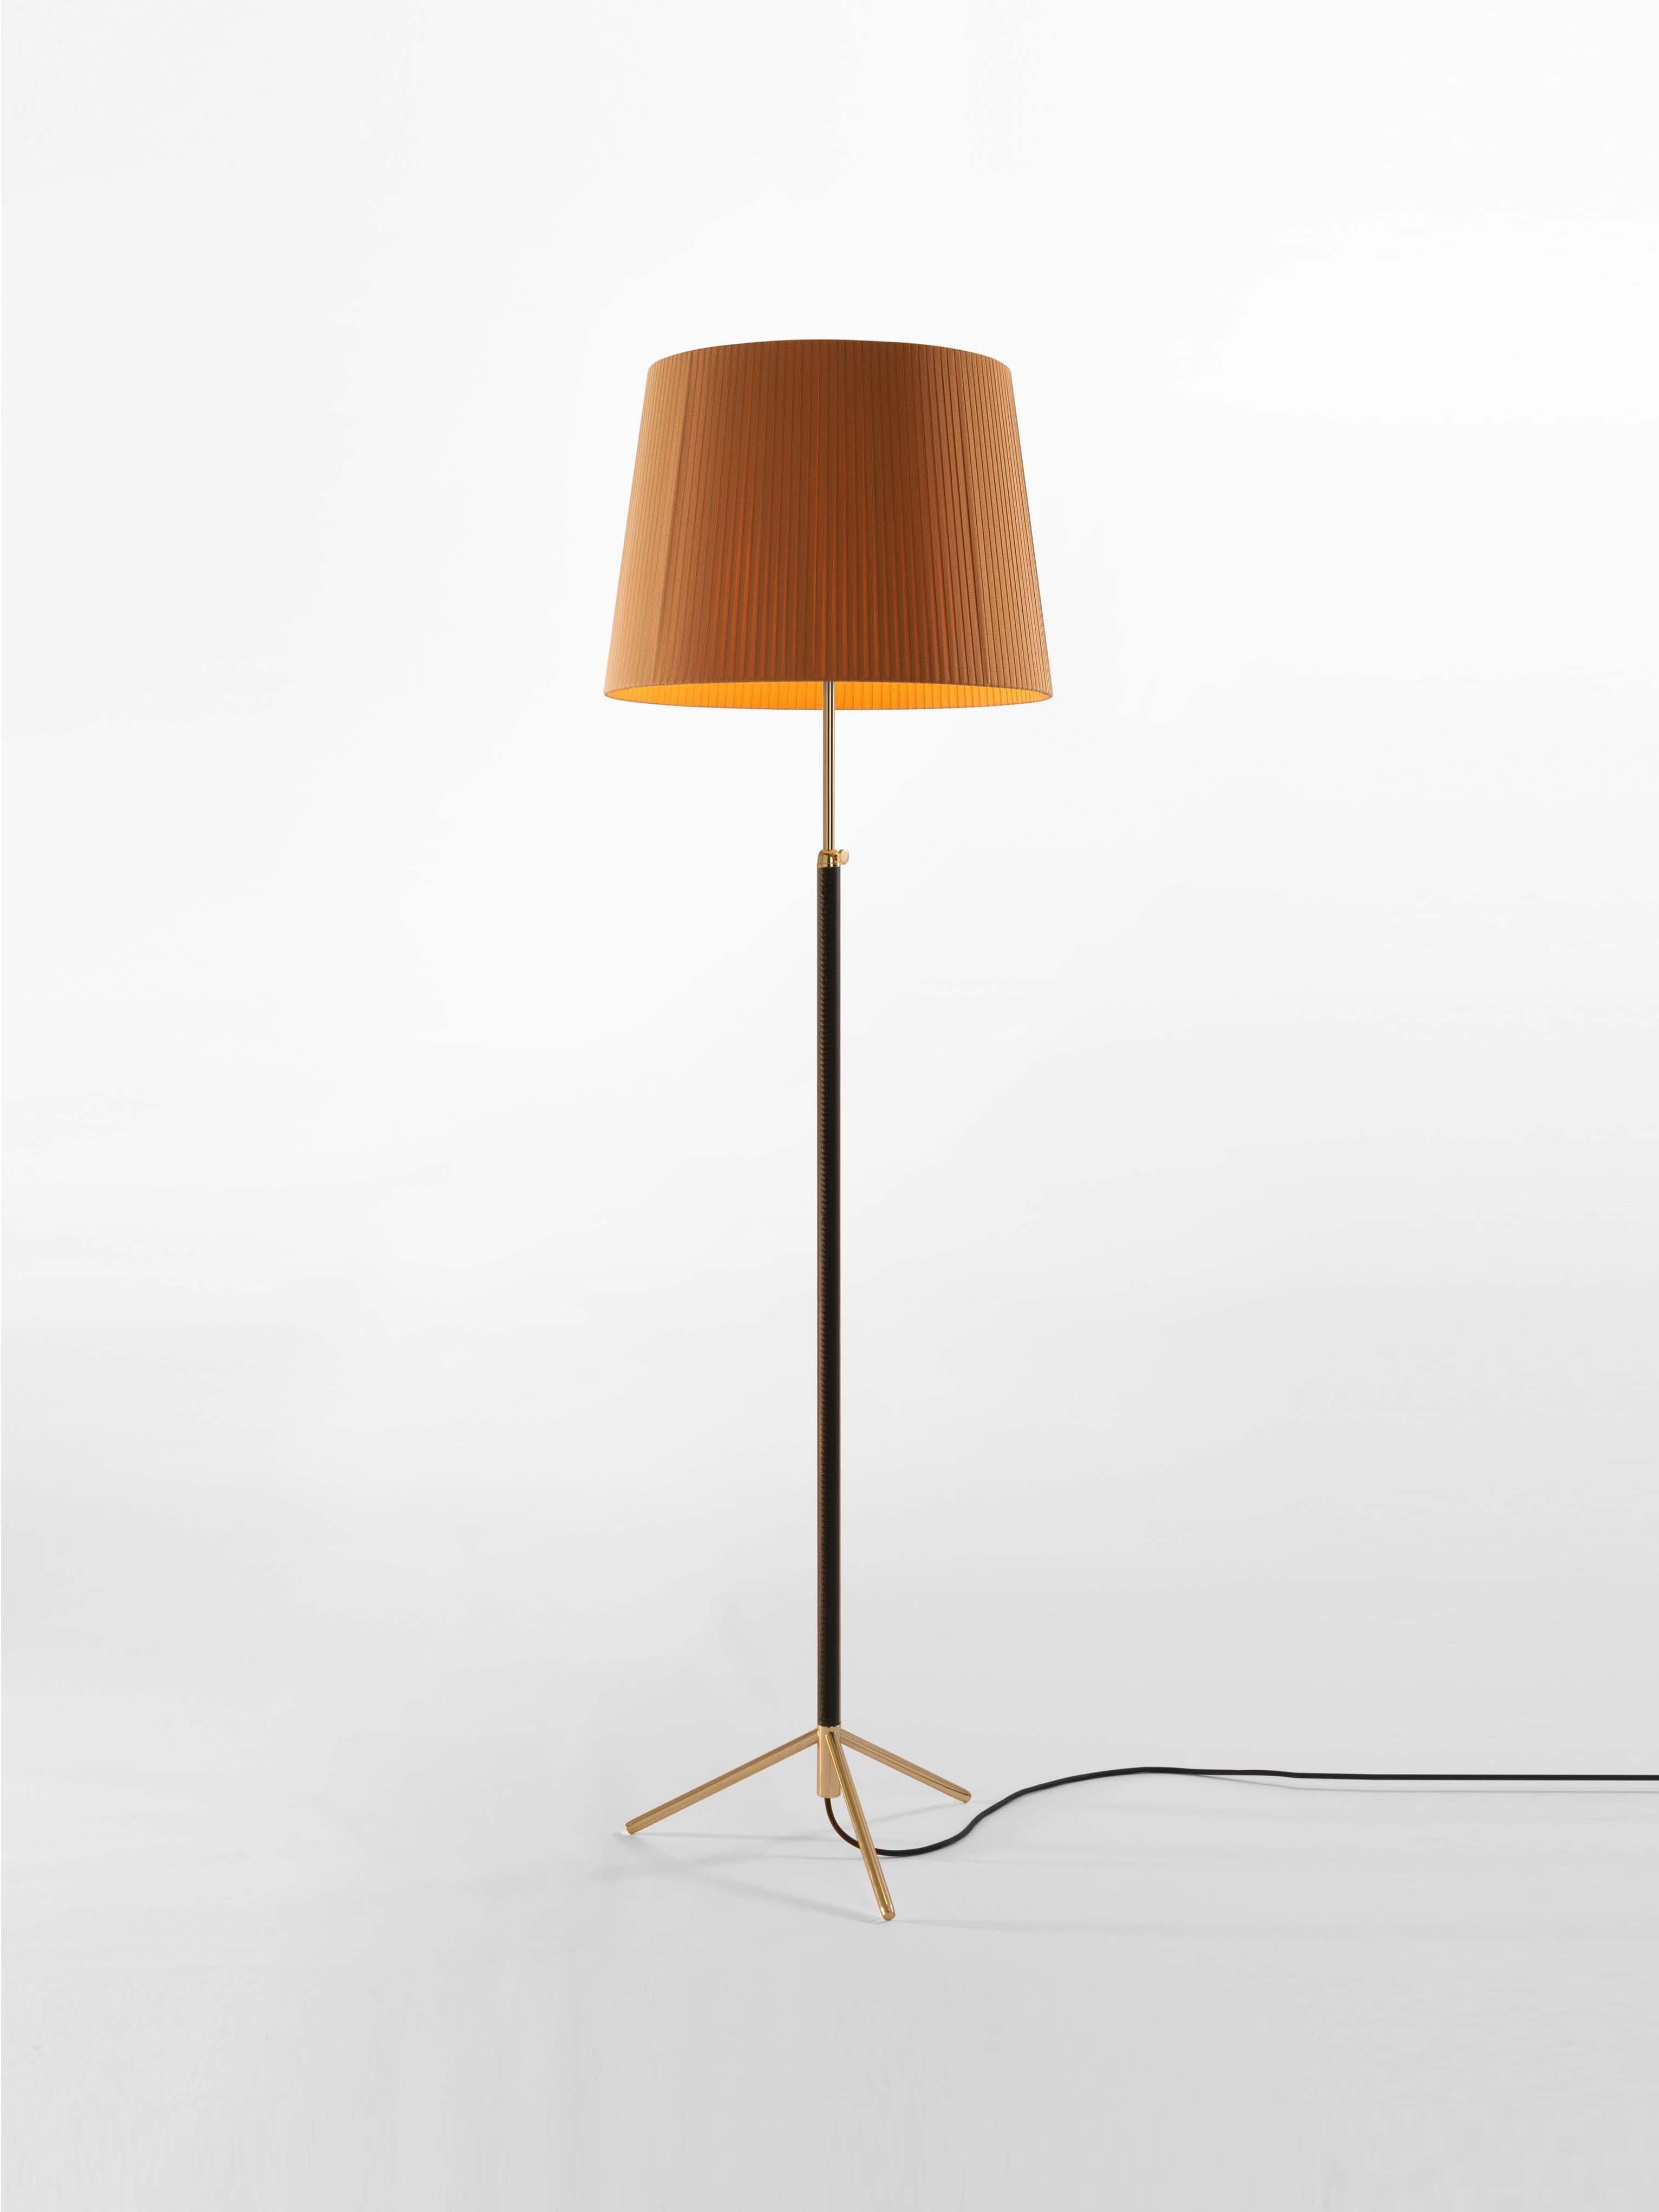 Mustard and brass pie de Salón G1 floor lamp by Jaume Sans
Dimensions: D 45 x H 120-160 cm
Materials: Metal, leather, ribbon.
Available in chrome-plated or polished brass structure.
Available in other shade colors and sizes.

This slender